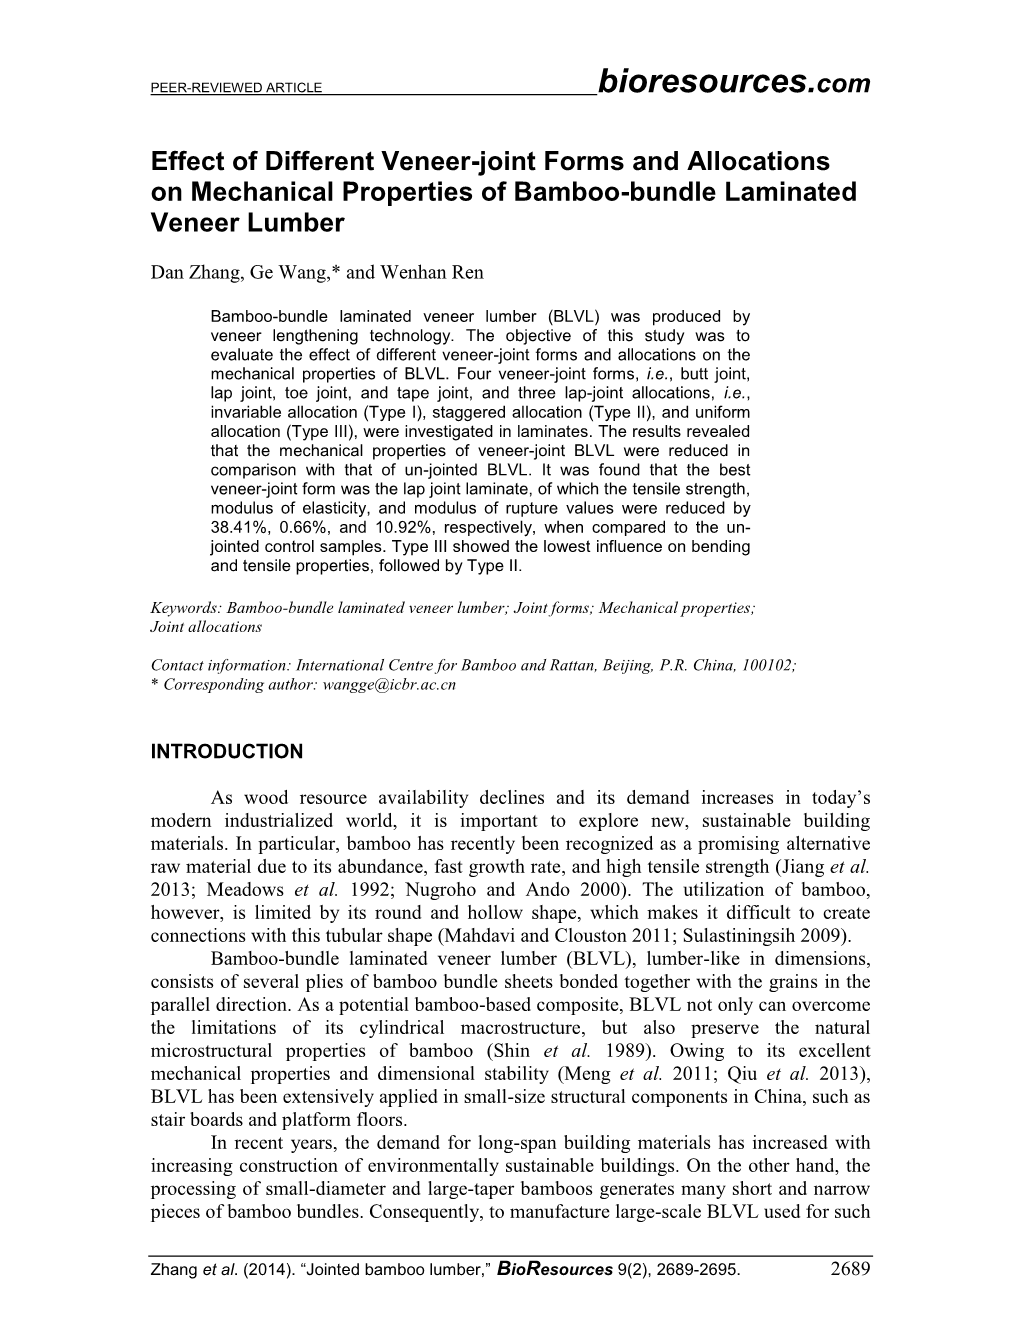 Effect of Different Veneer-Joint Forms and Allocations on Mechanical Properties of Bamboo-Bundle Laminated Veneer Lumber